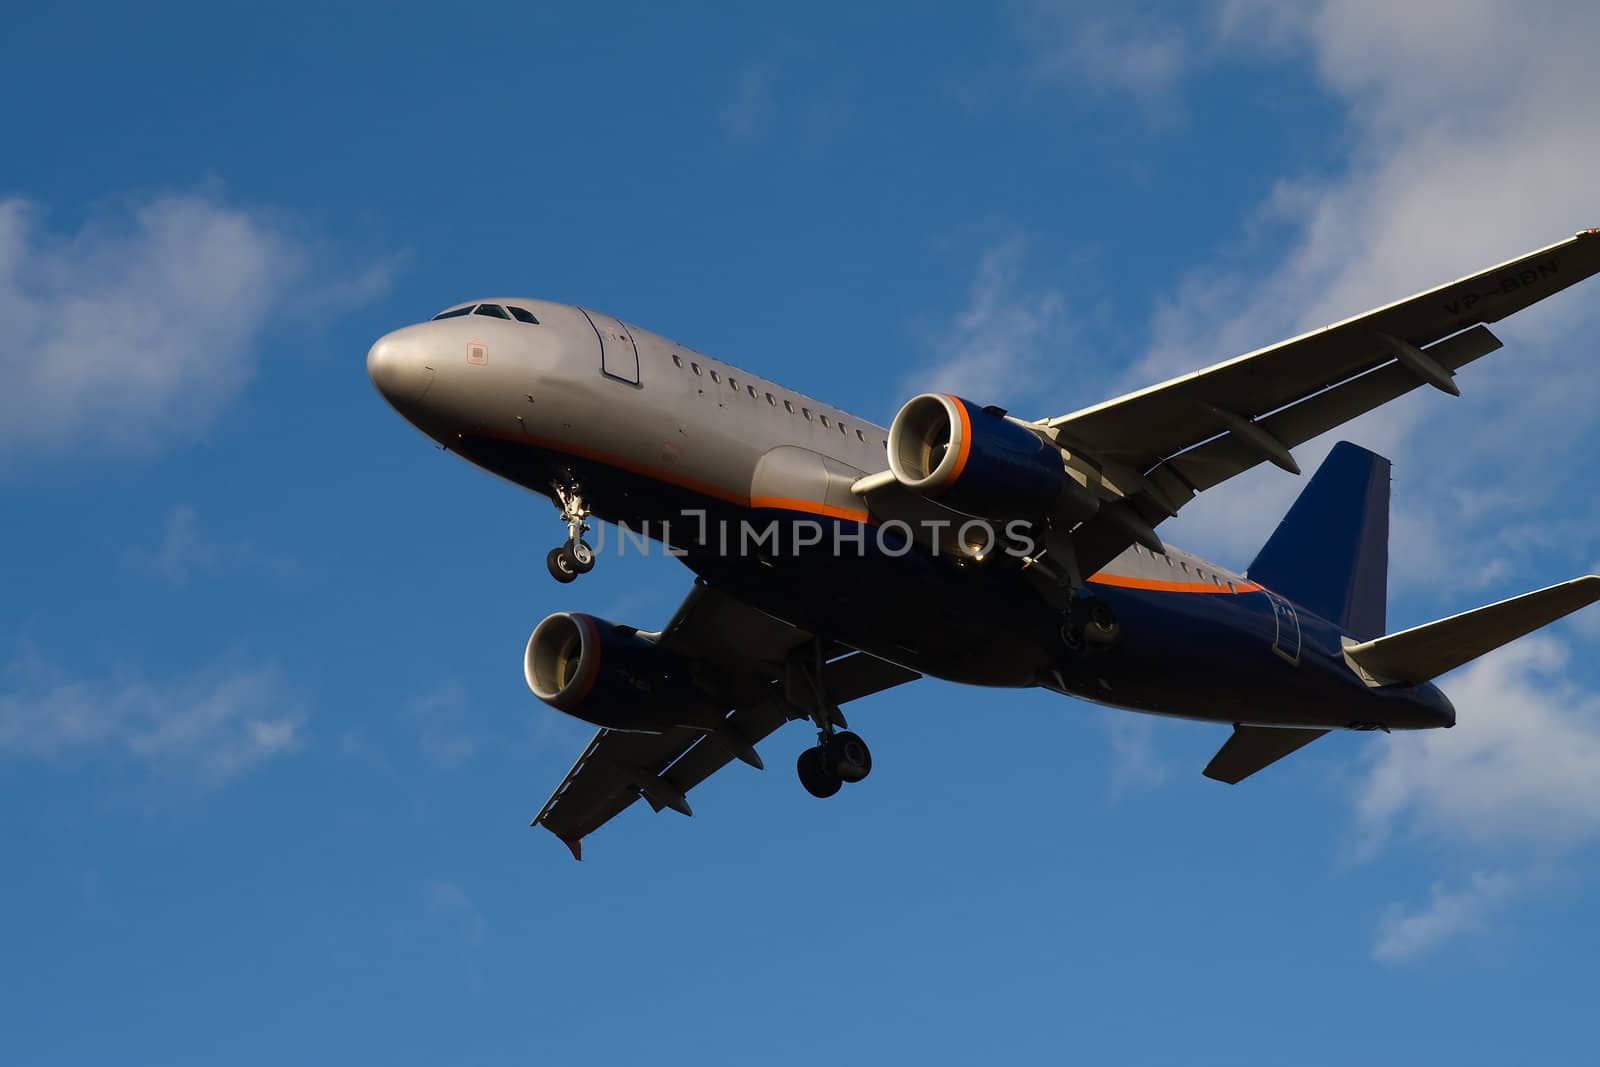 Passenger jet flying in blue sky with clouds by serpl